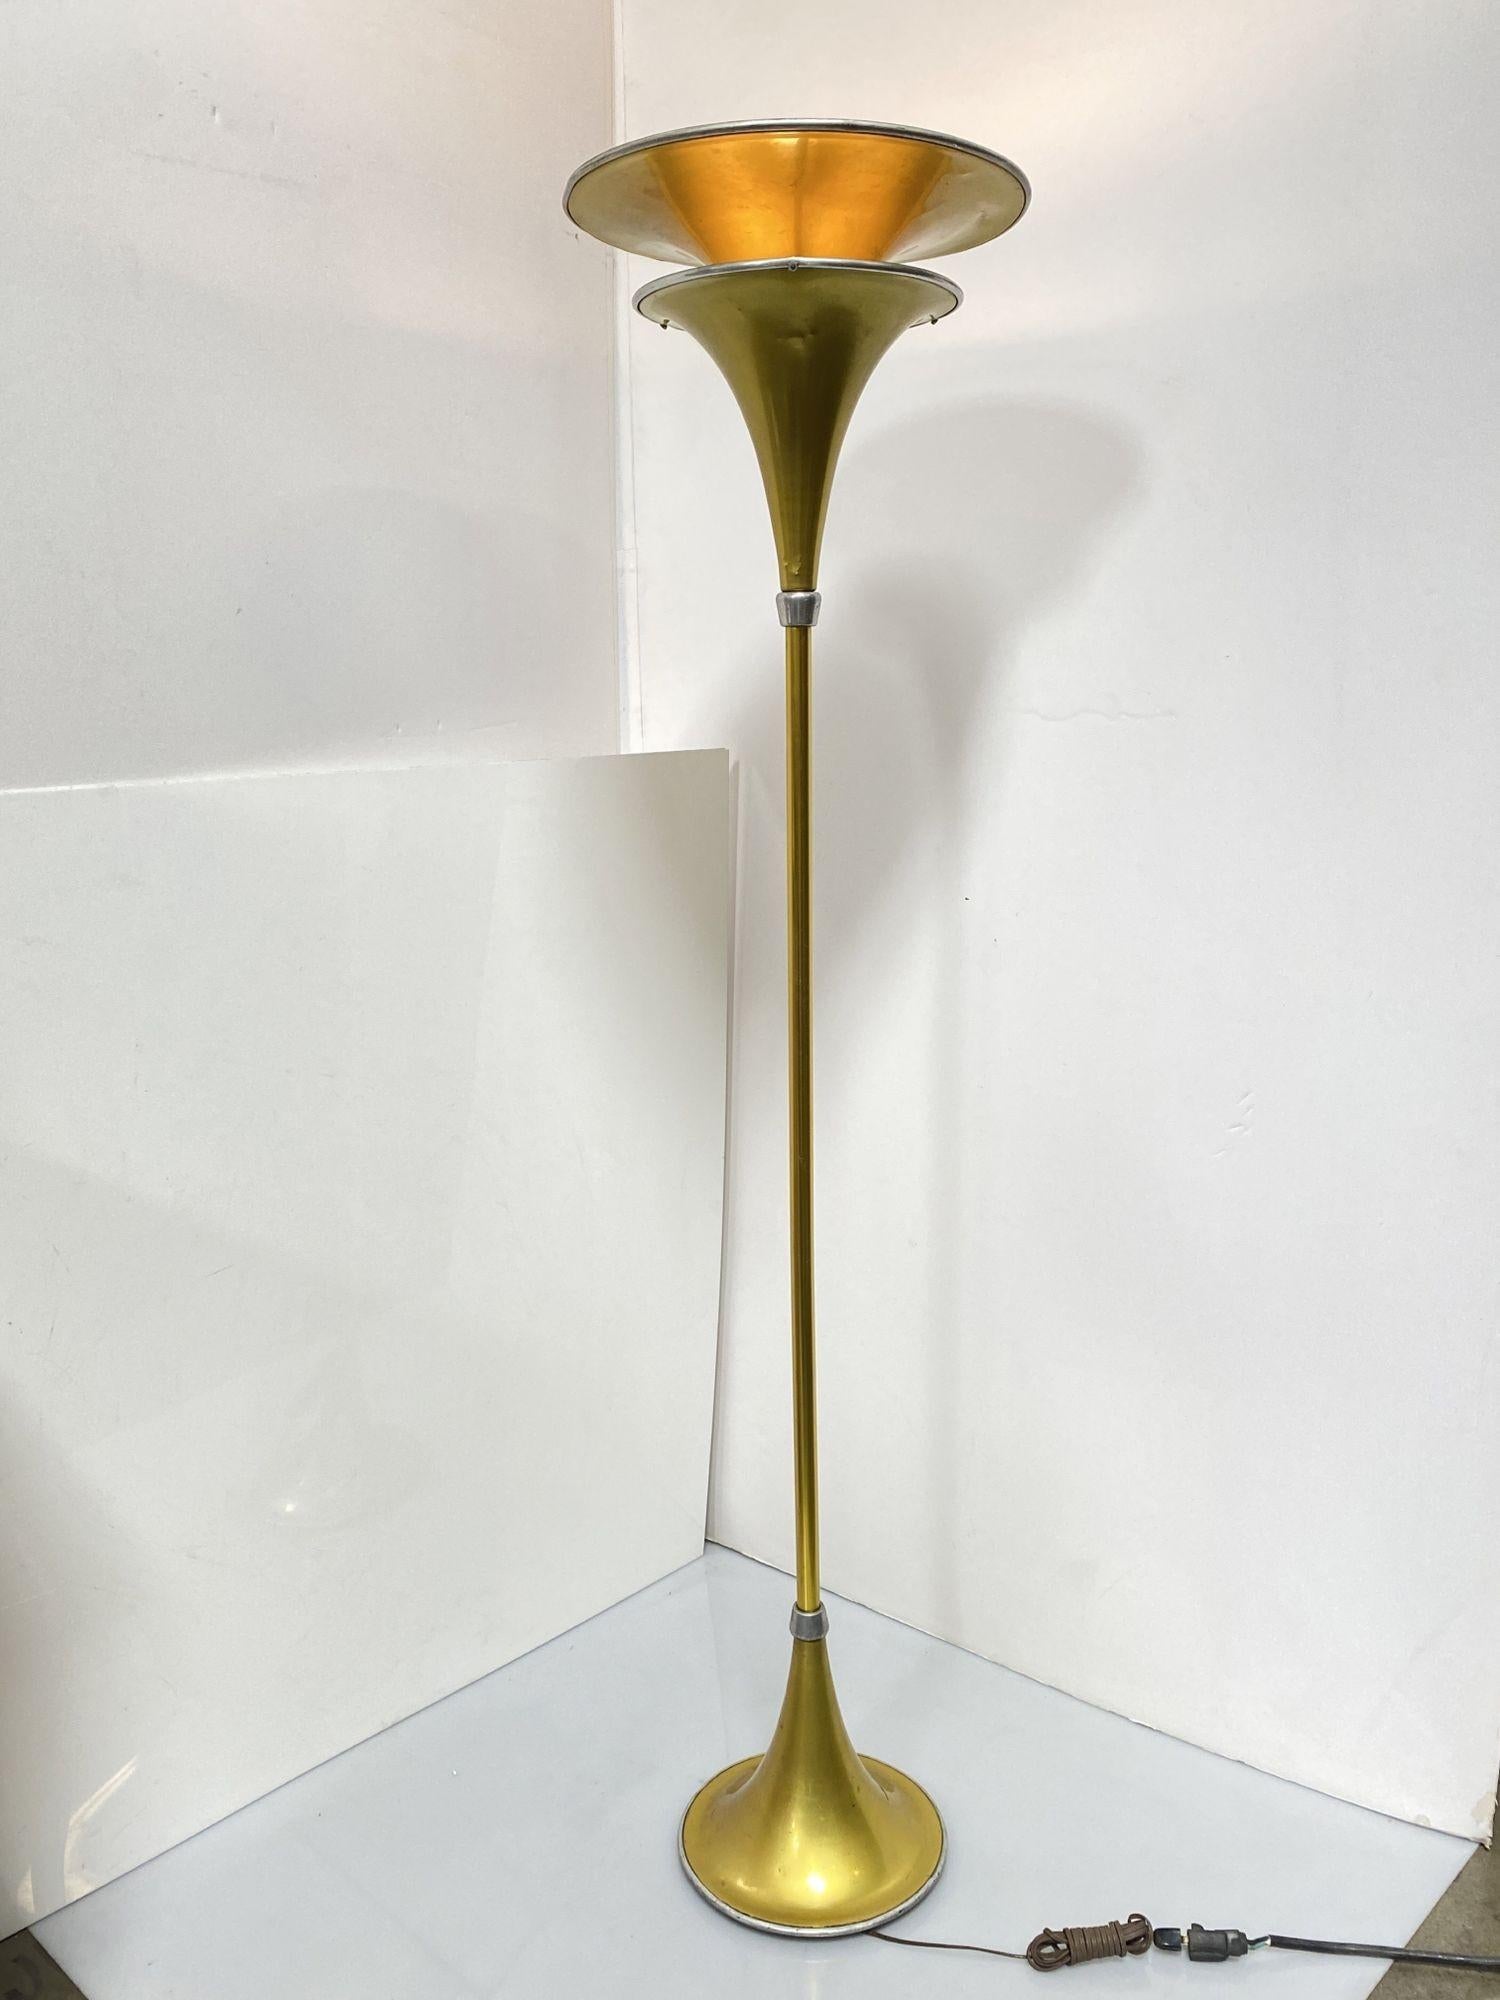 Rare Art Deco, machine-age anodized aluminum torchiere floor lamp. Classic two tier top, as well as unusual trumpet base, gold color, 16